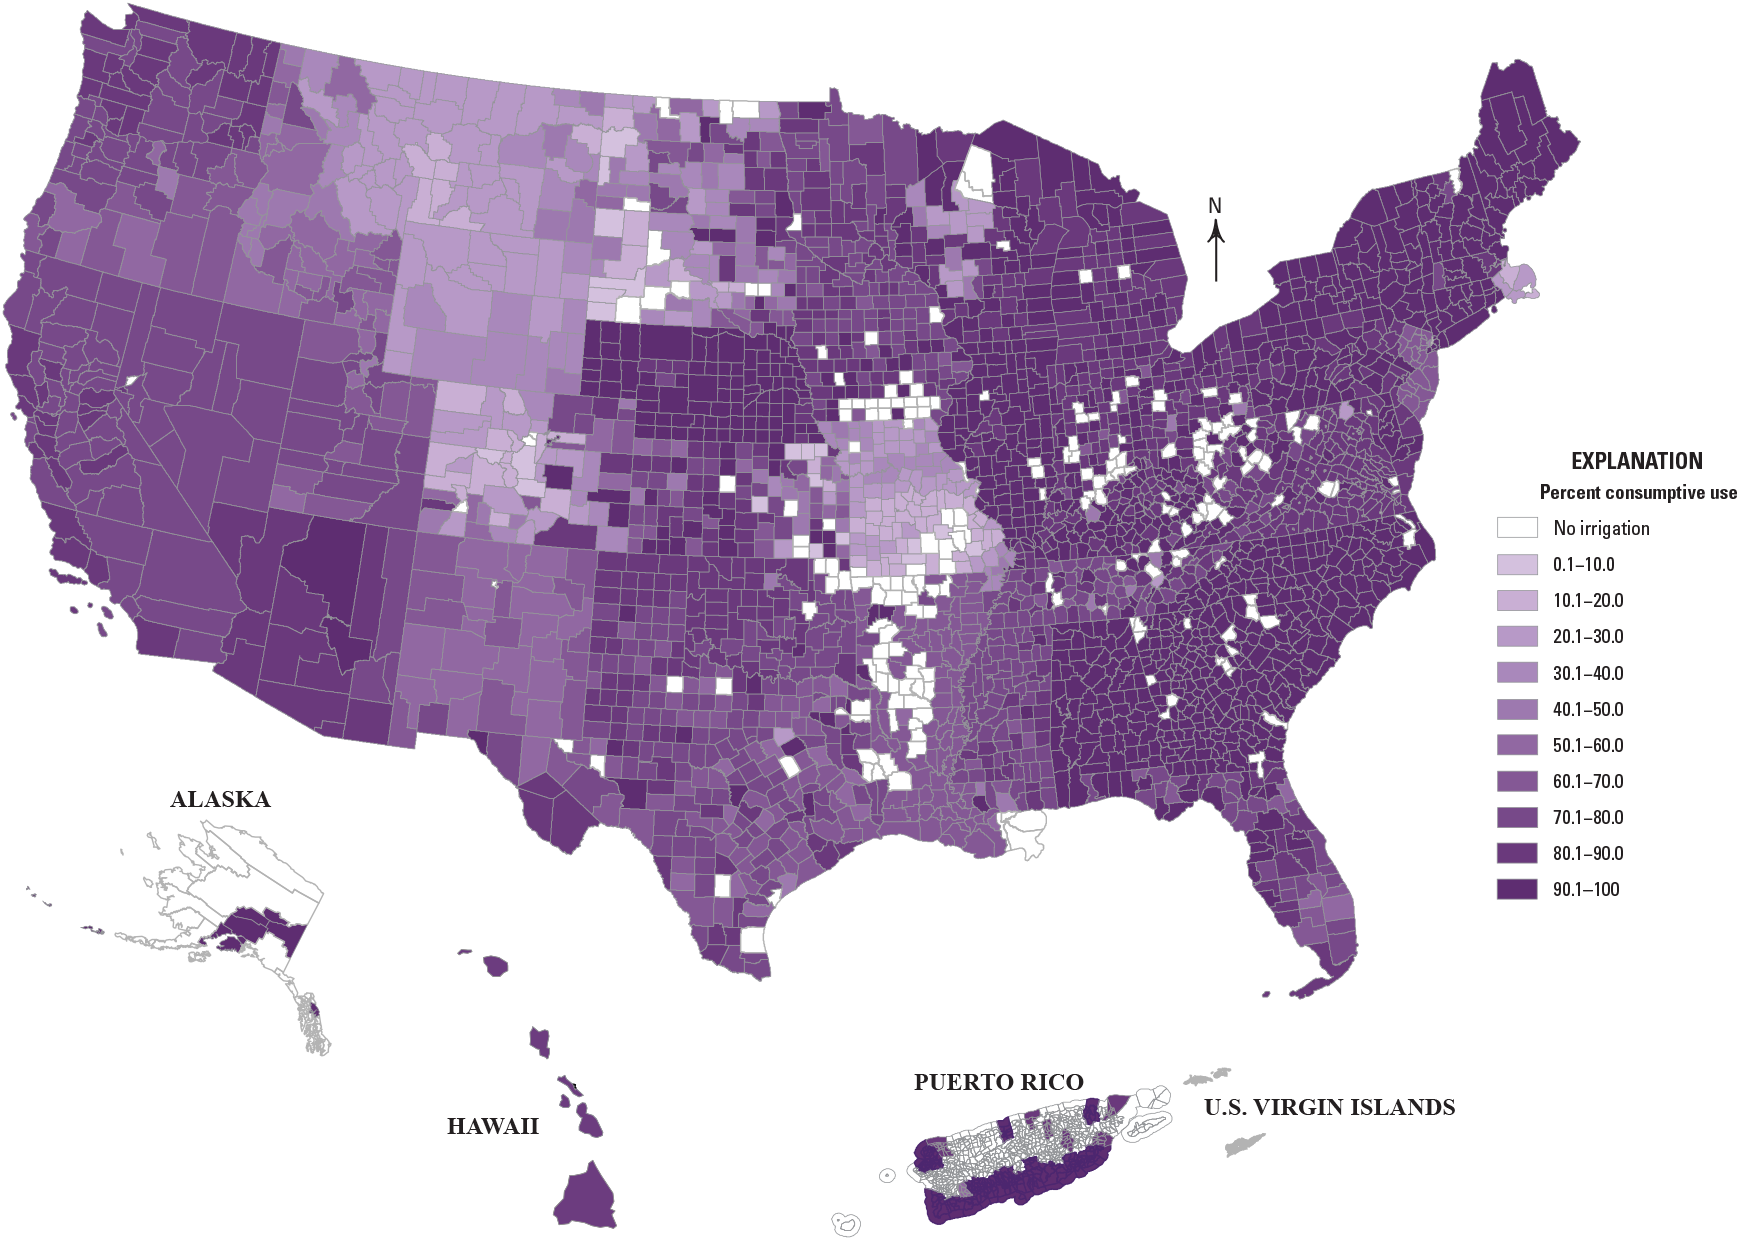 Color-shading that represents percentages of consumption by county or municipality.